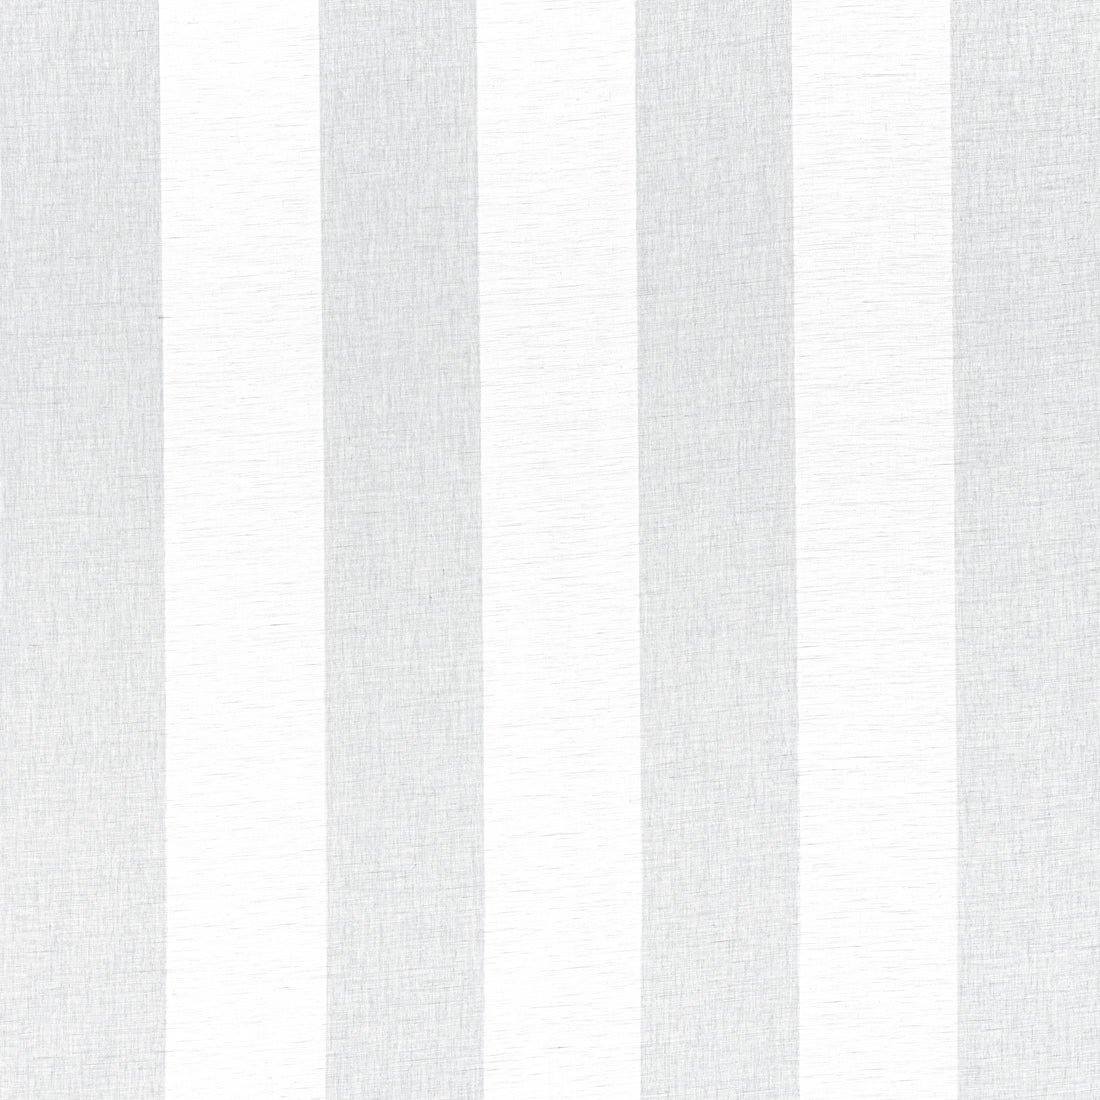 Newport Stripe fabric in platinum and white color - pattern number FWW8217 - by Thibaut in the Aura collection